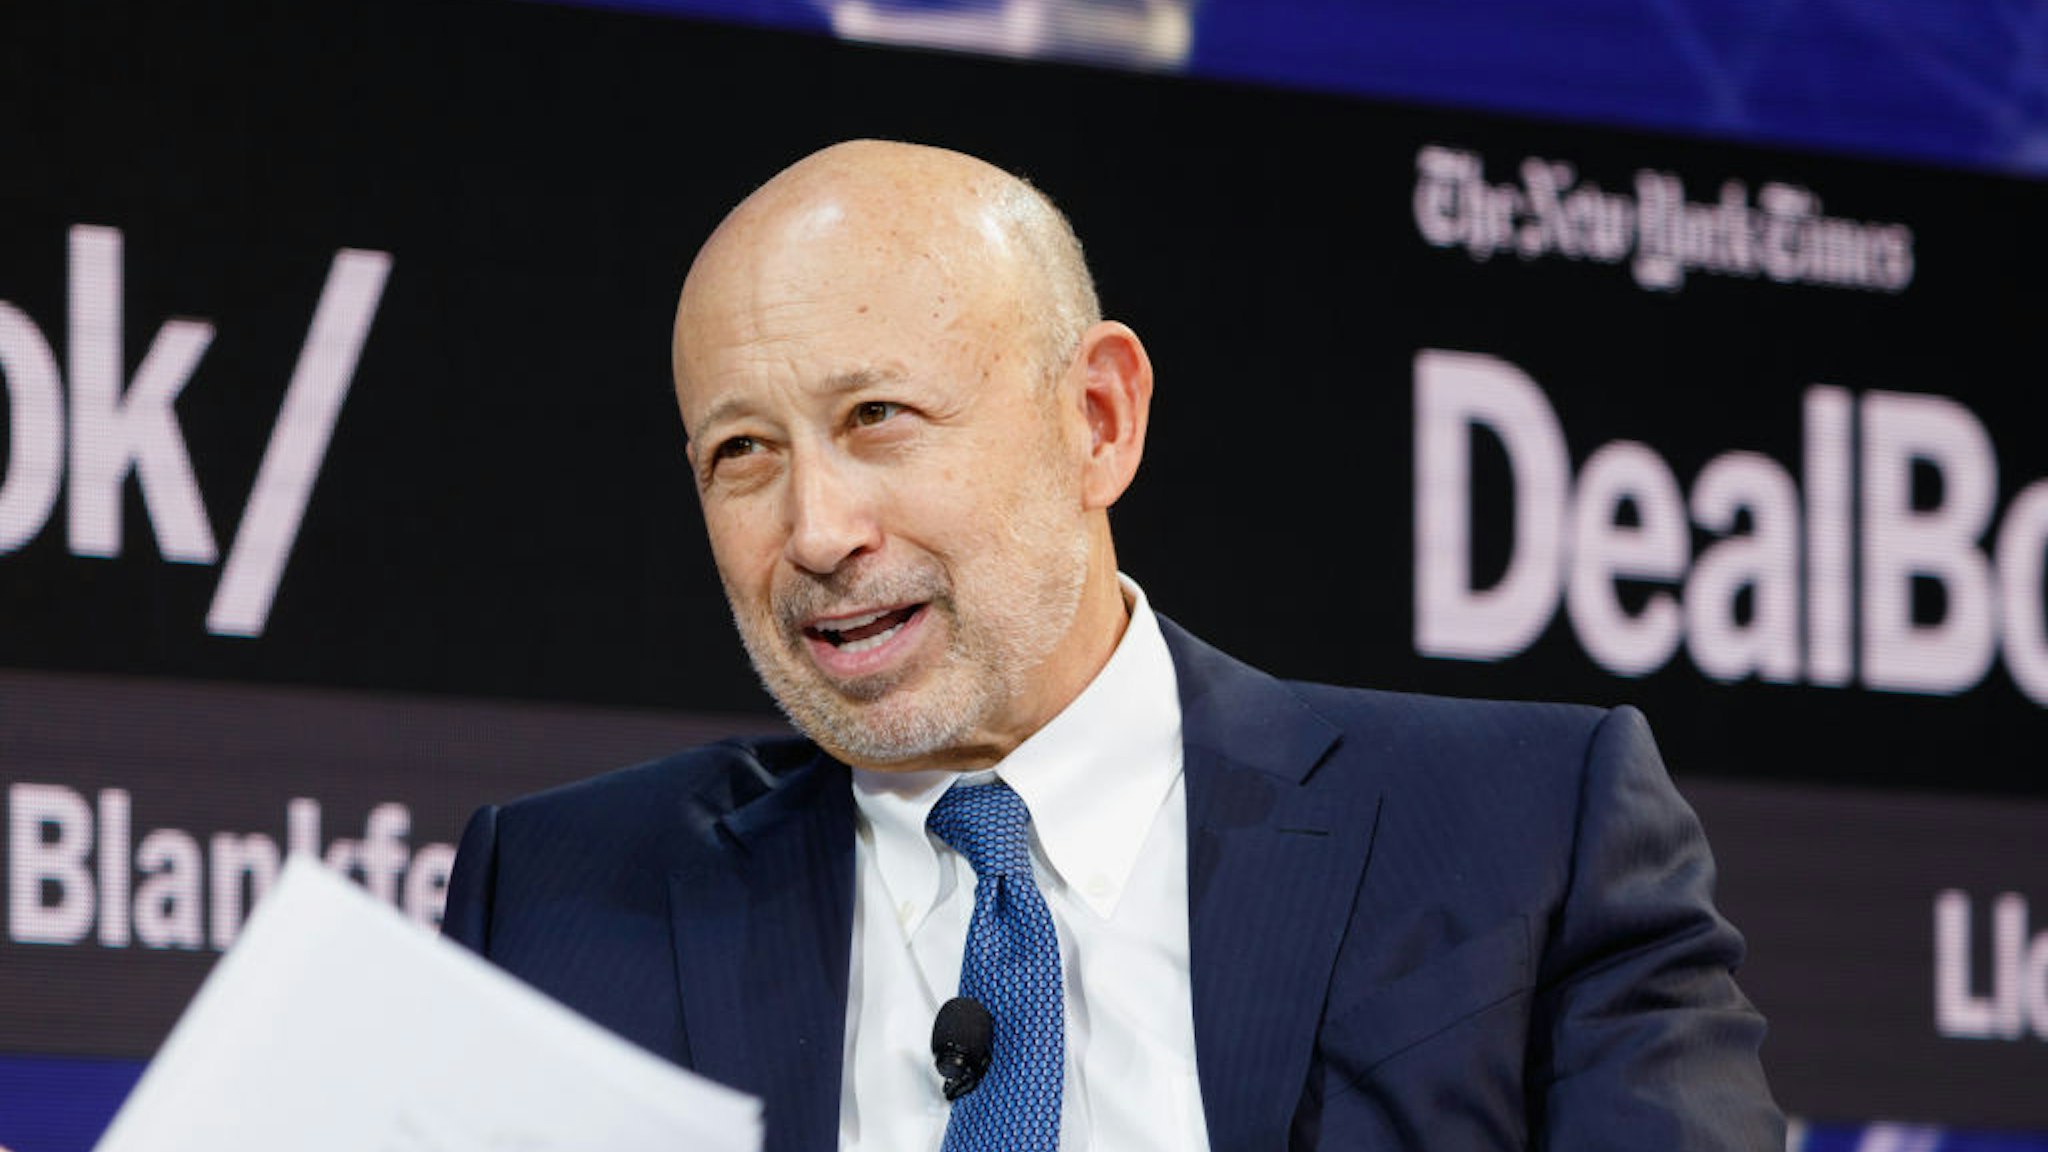 Lloyd Blankfein, Senior Chairman, The Goldman Sachs Group, warned the risk of a recession is "very, very high"